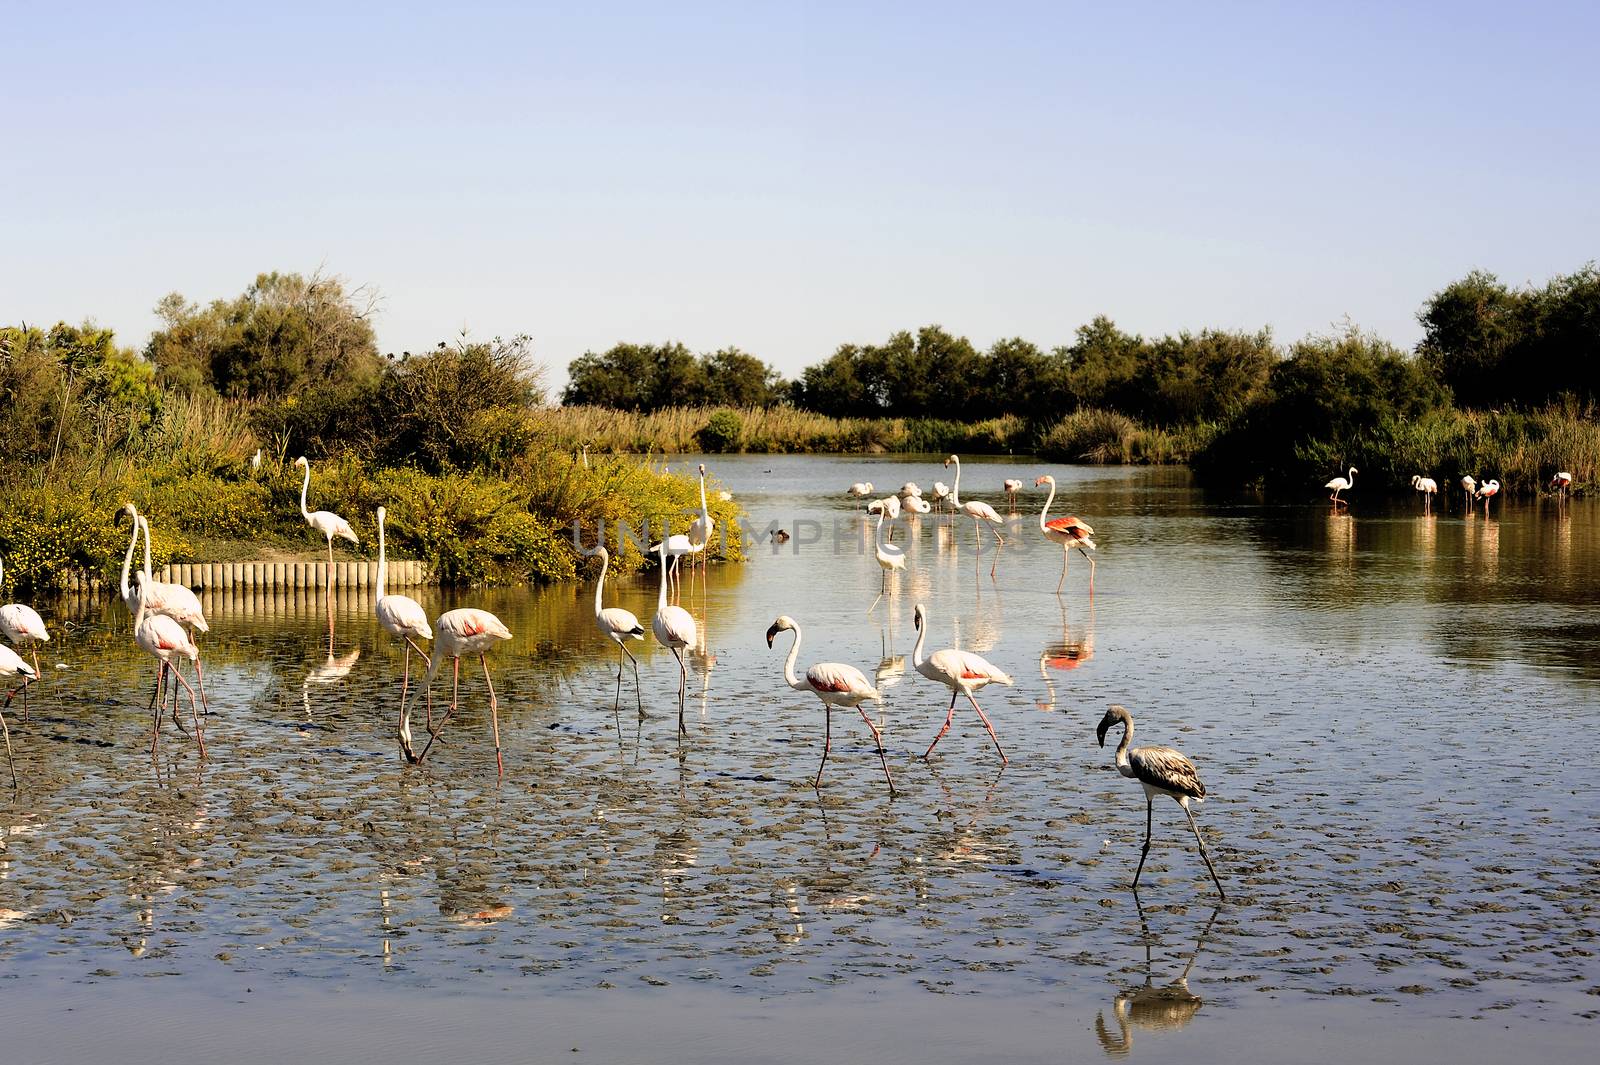 Flamingos in Camargue by gillespaire